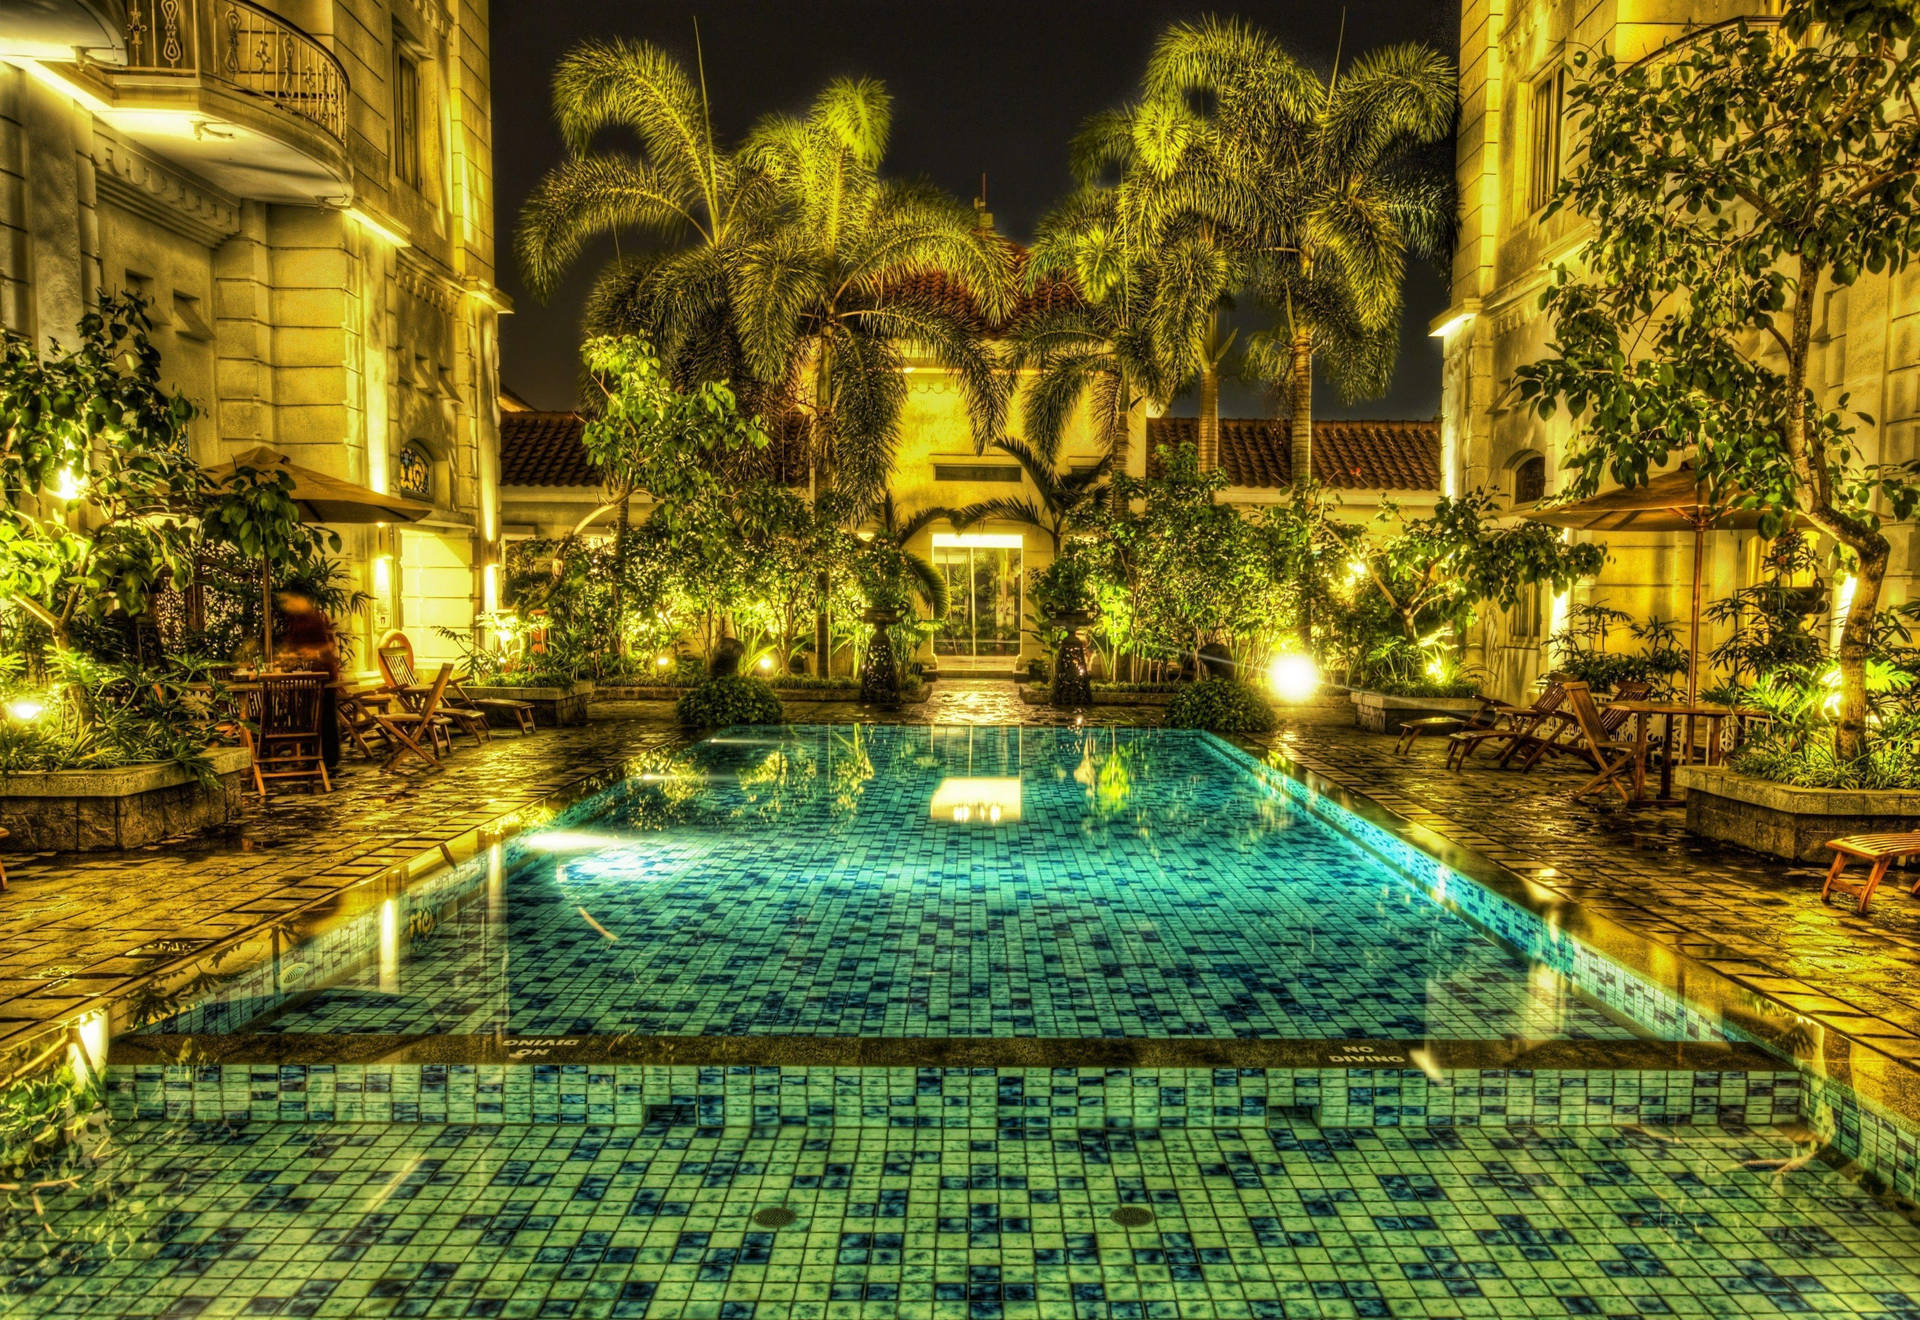 Stunning View Of The Grand Pool In Jakarta, Indonesia. Background